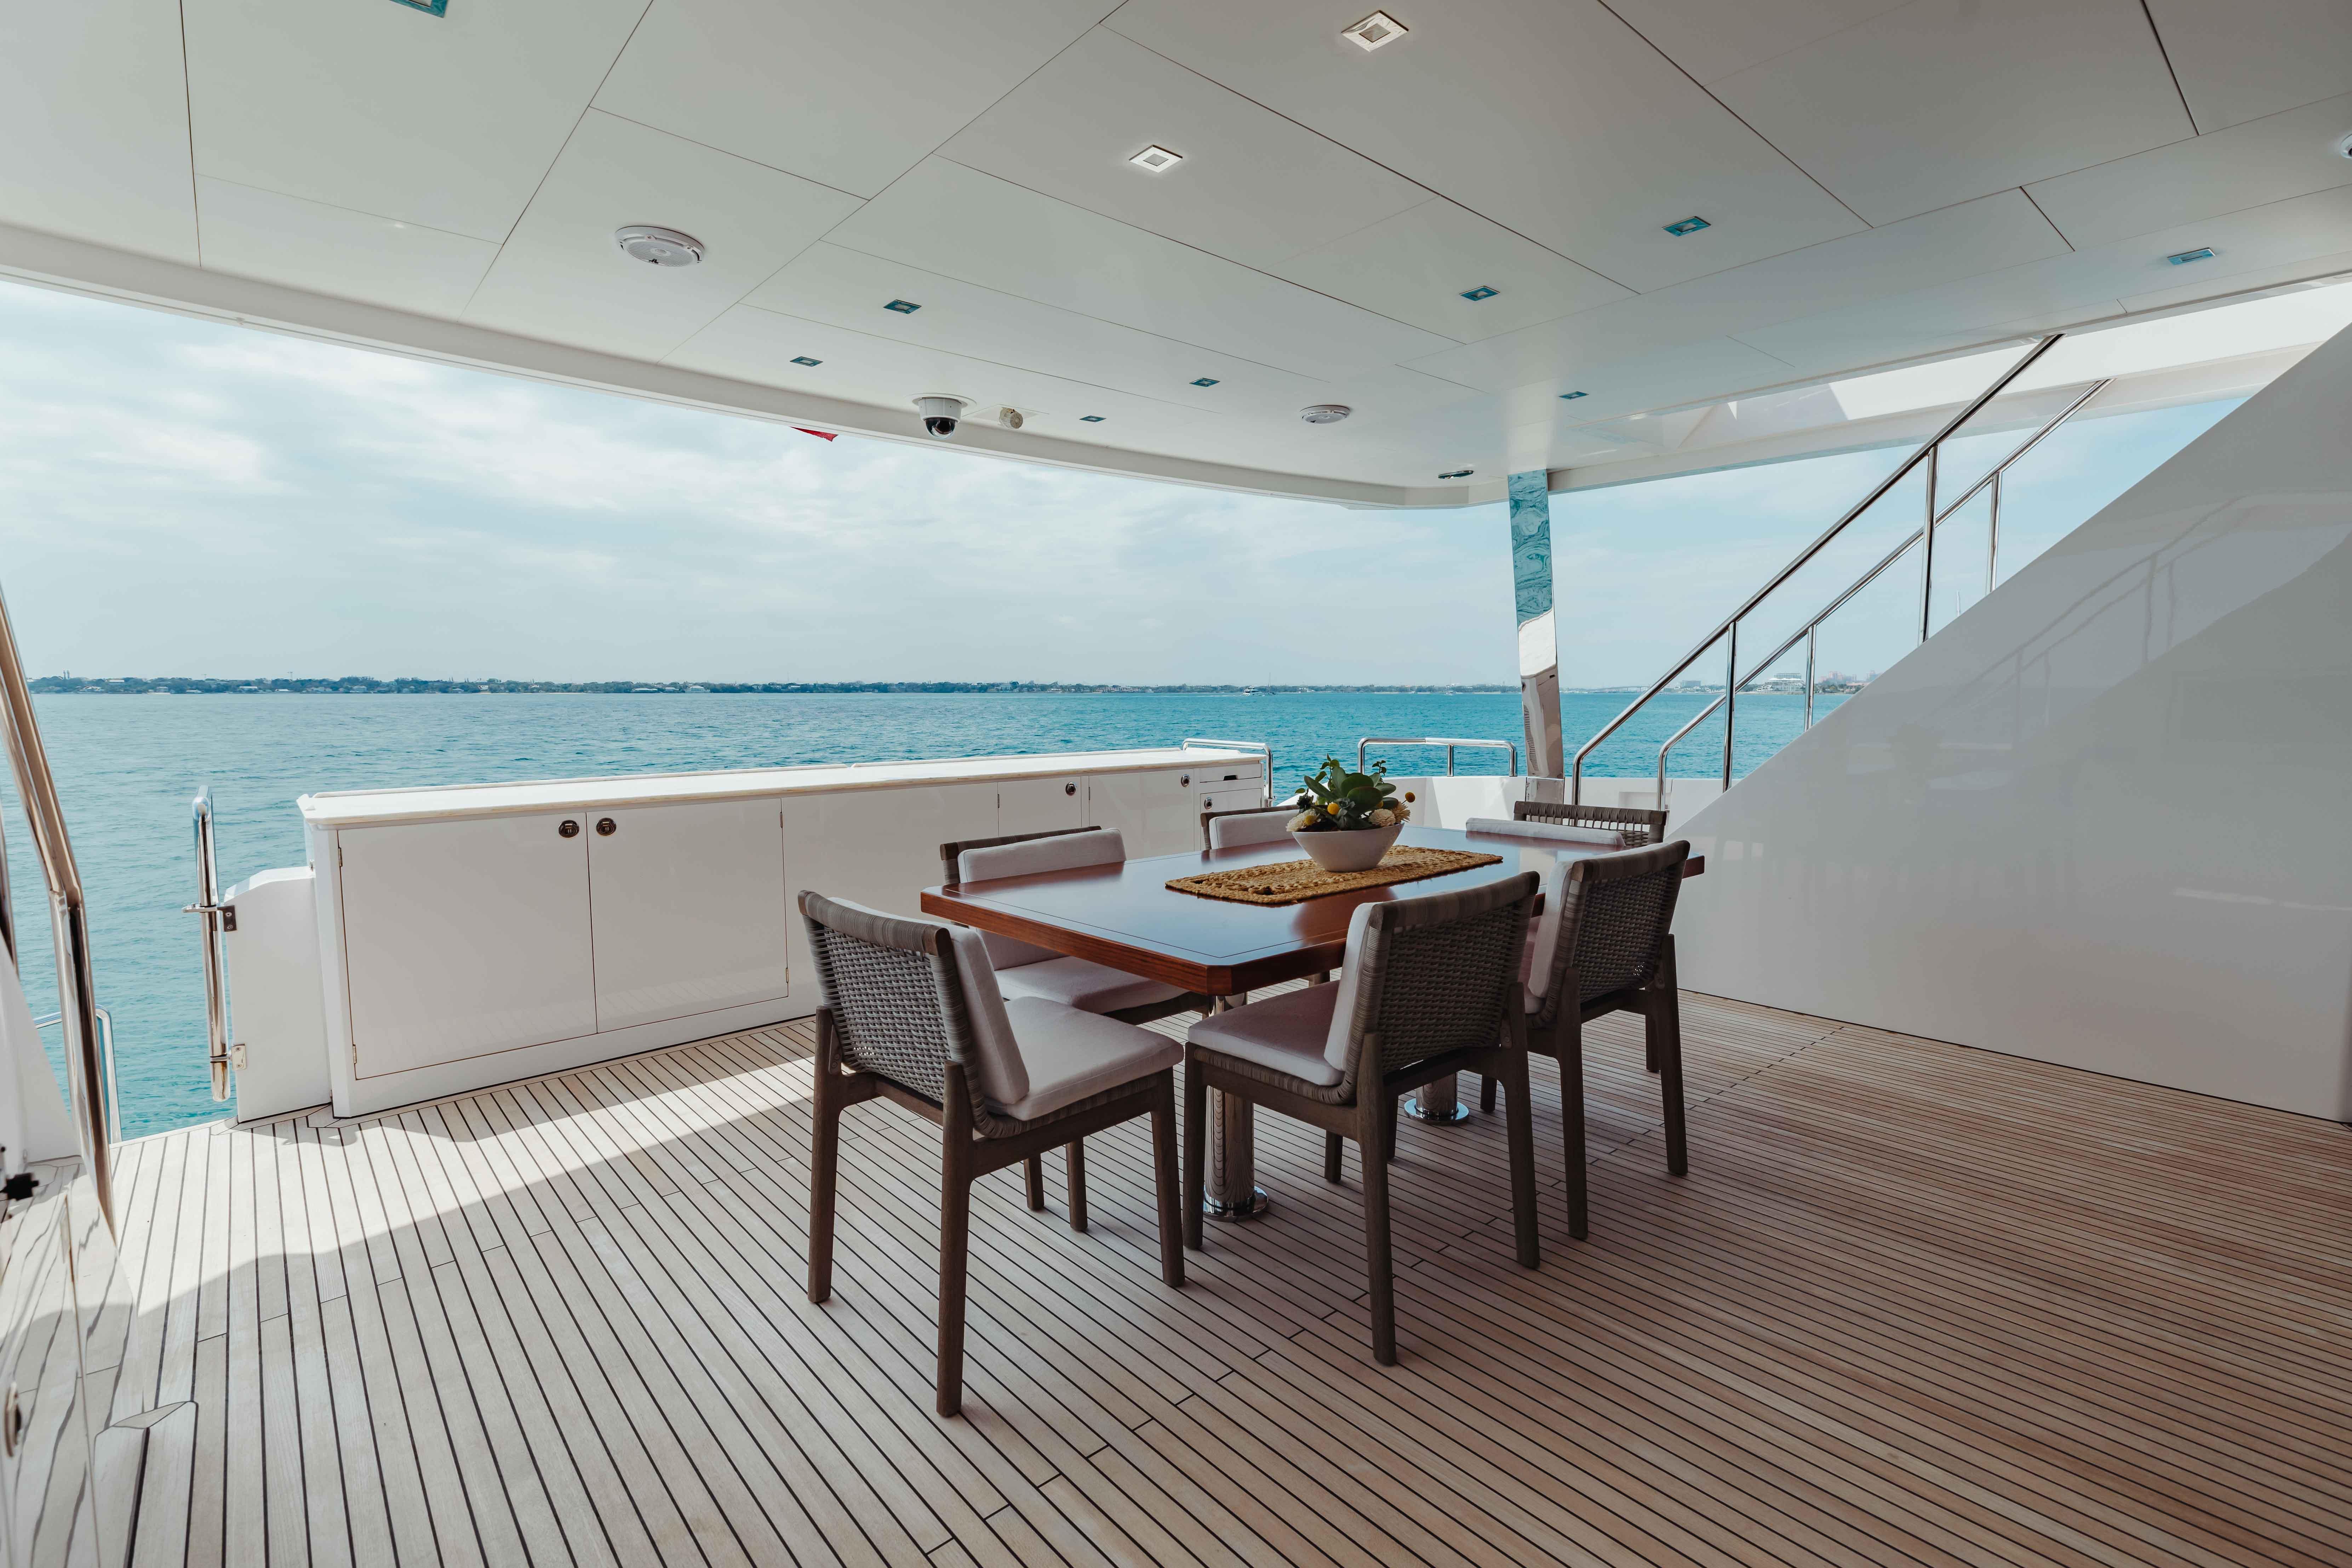 Aft Deck and Cabinets